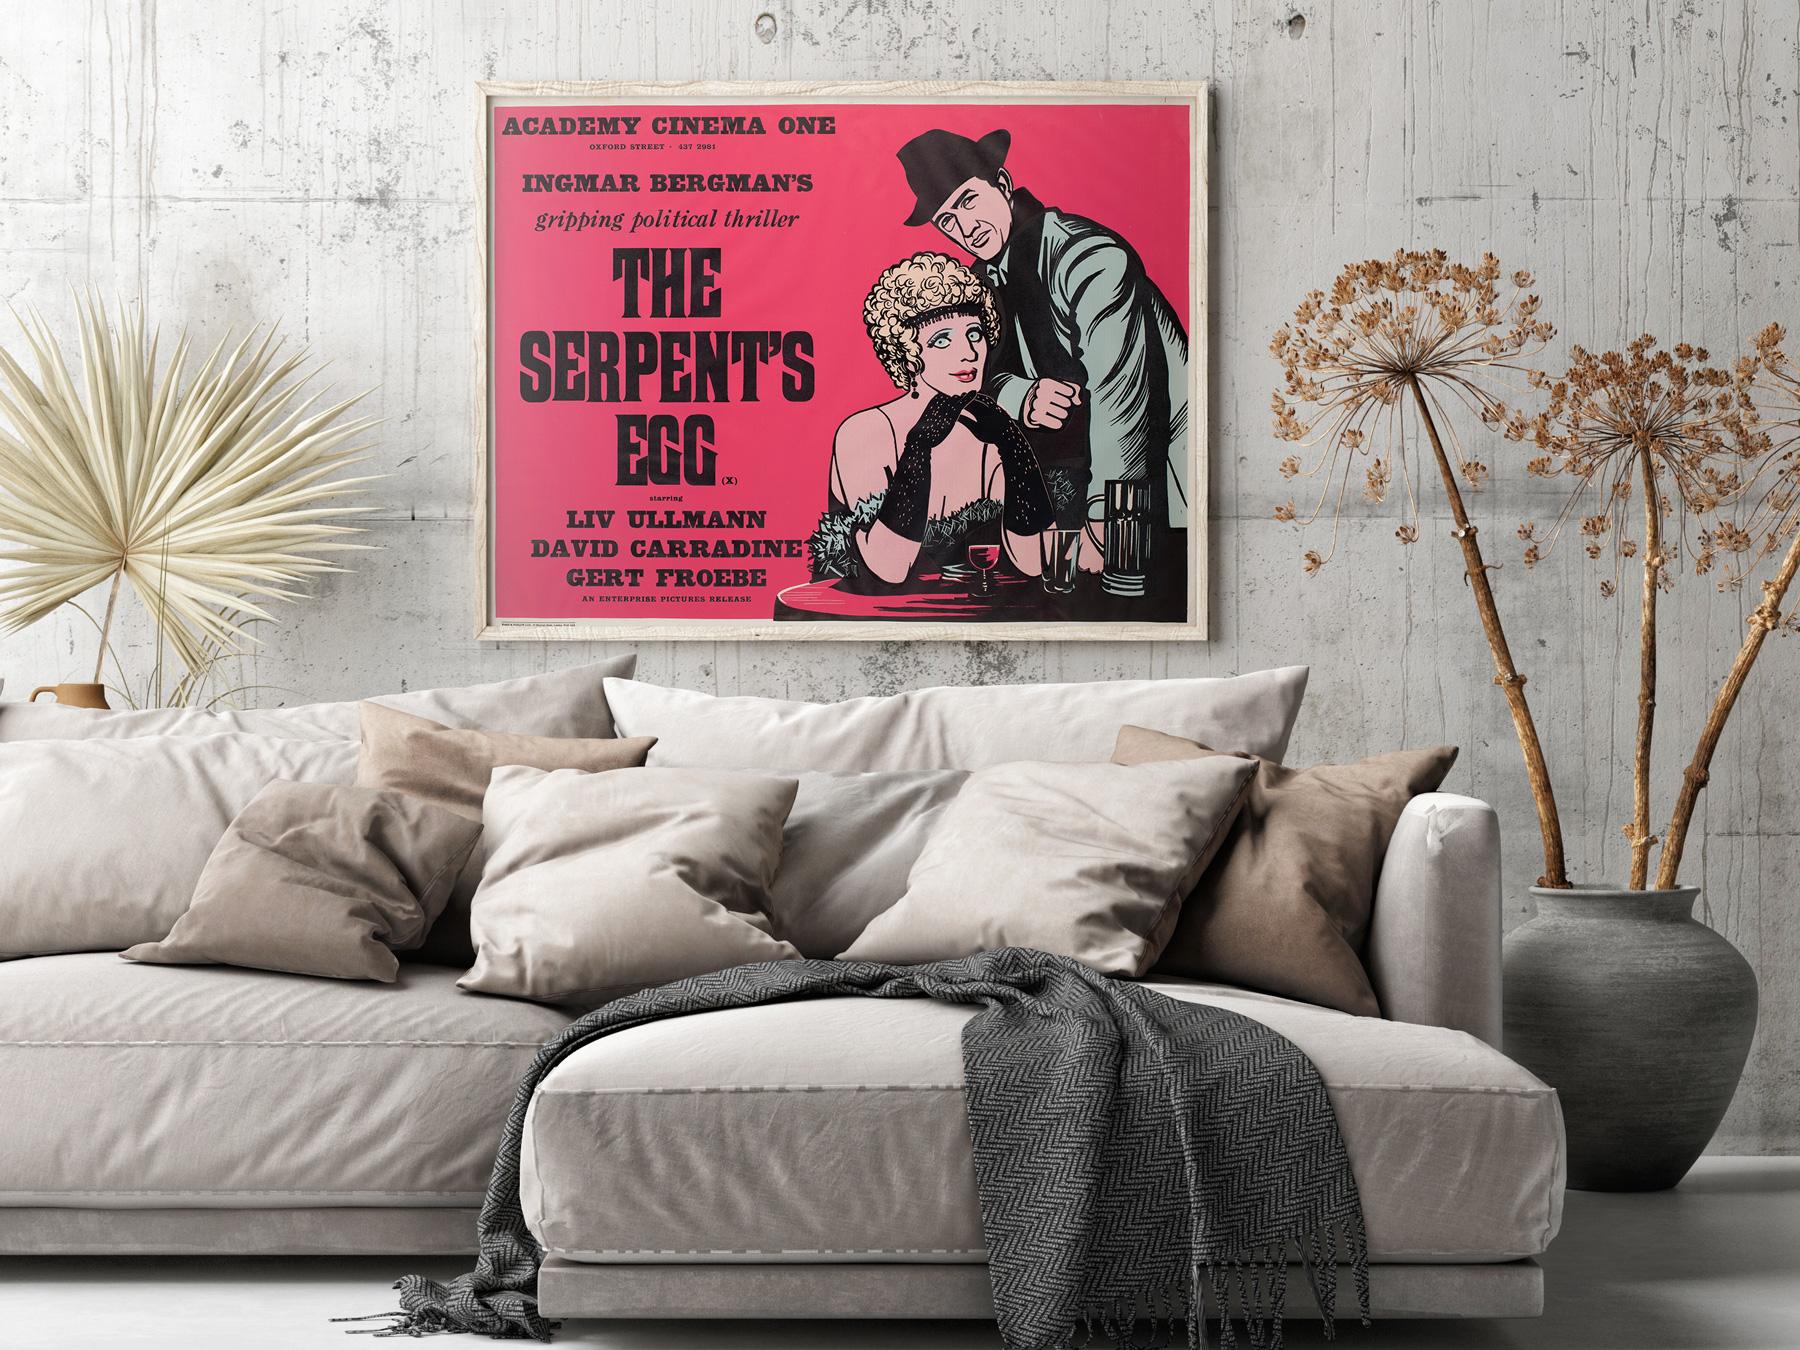 Fabulous original Academy Cinema film poster for Ingmar Bergman's thriller “The Serpent's Egg”. Design by Peter Strausfeld.

Cologne born Strausfeld came to England in 1938. Whilst interned on the Isle of Man during the Second World War, he